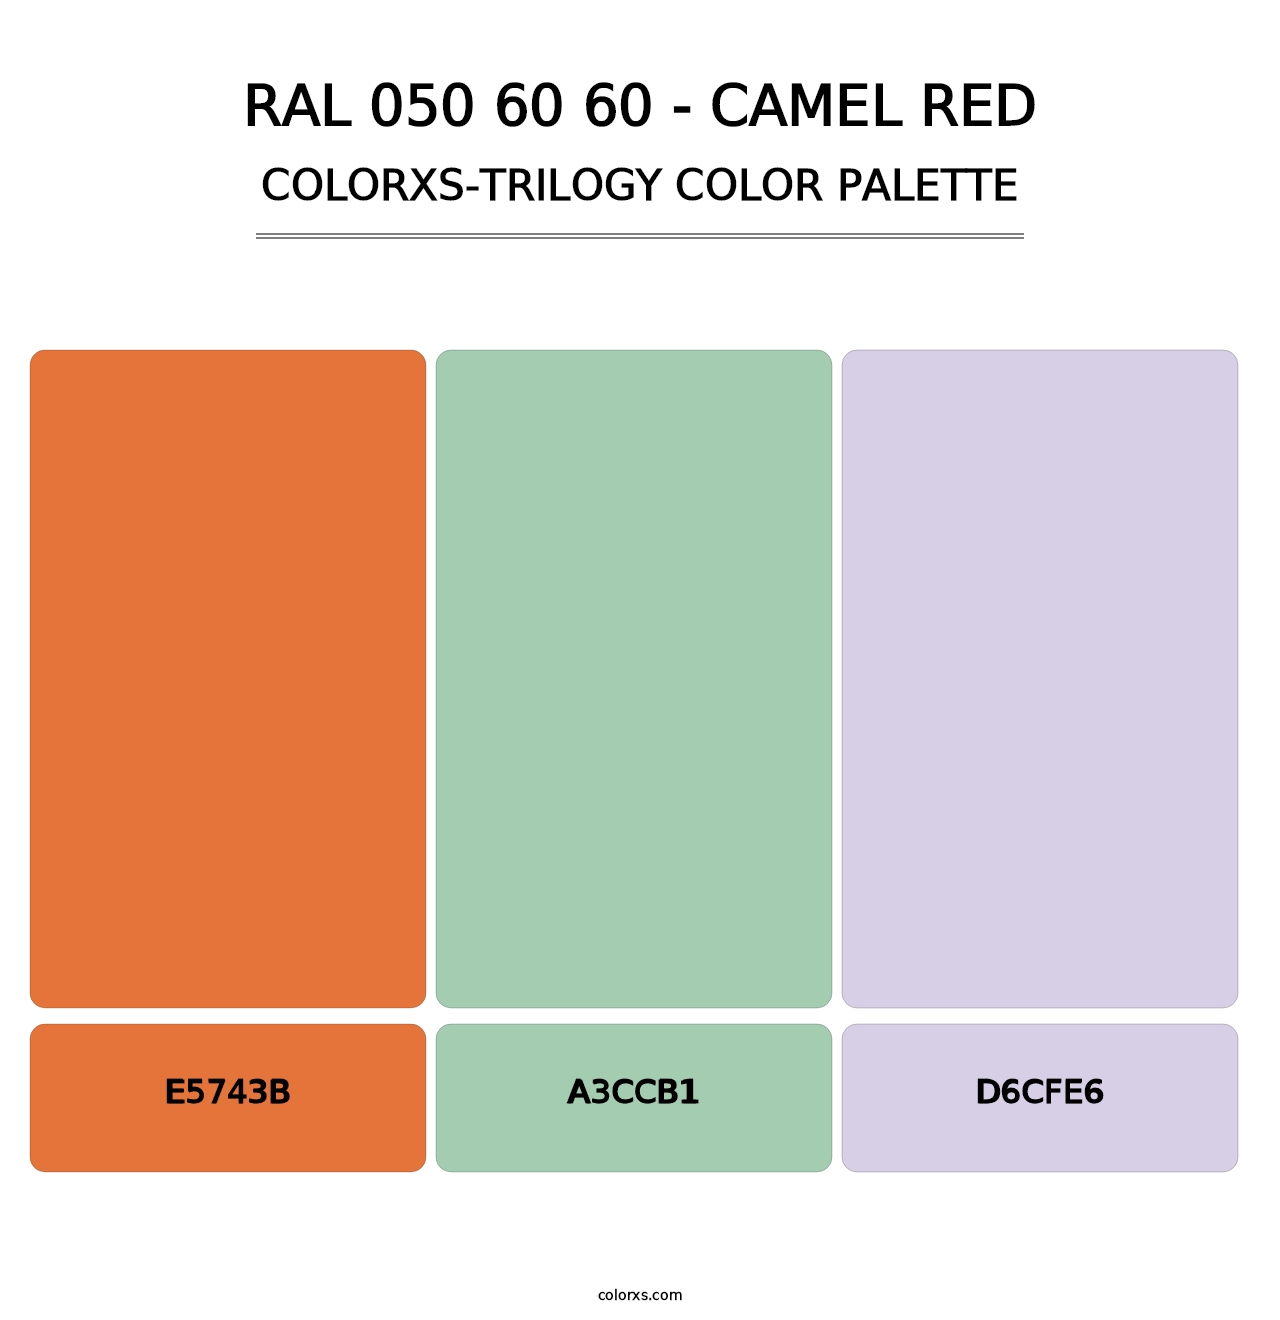 RAL 050 60 60 - Camel Red - Colorxs Trilogy Palette